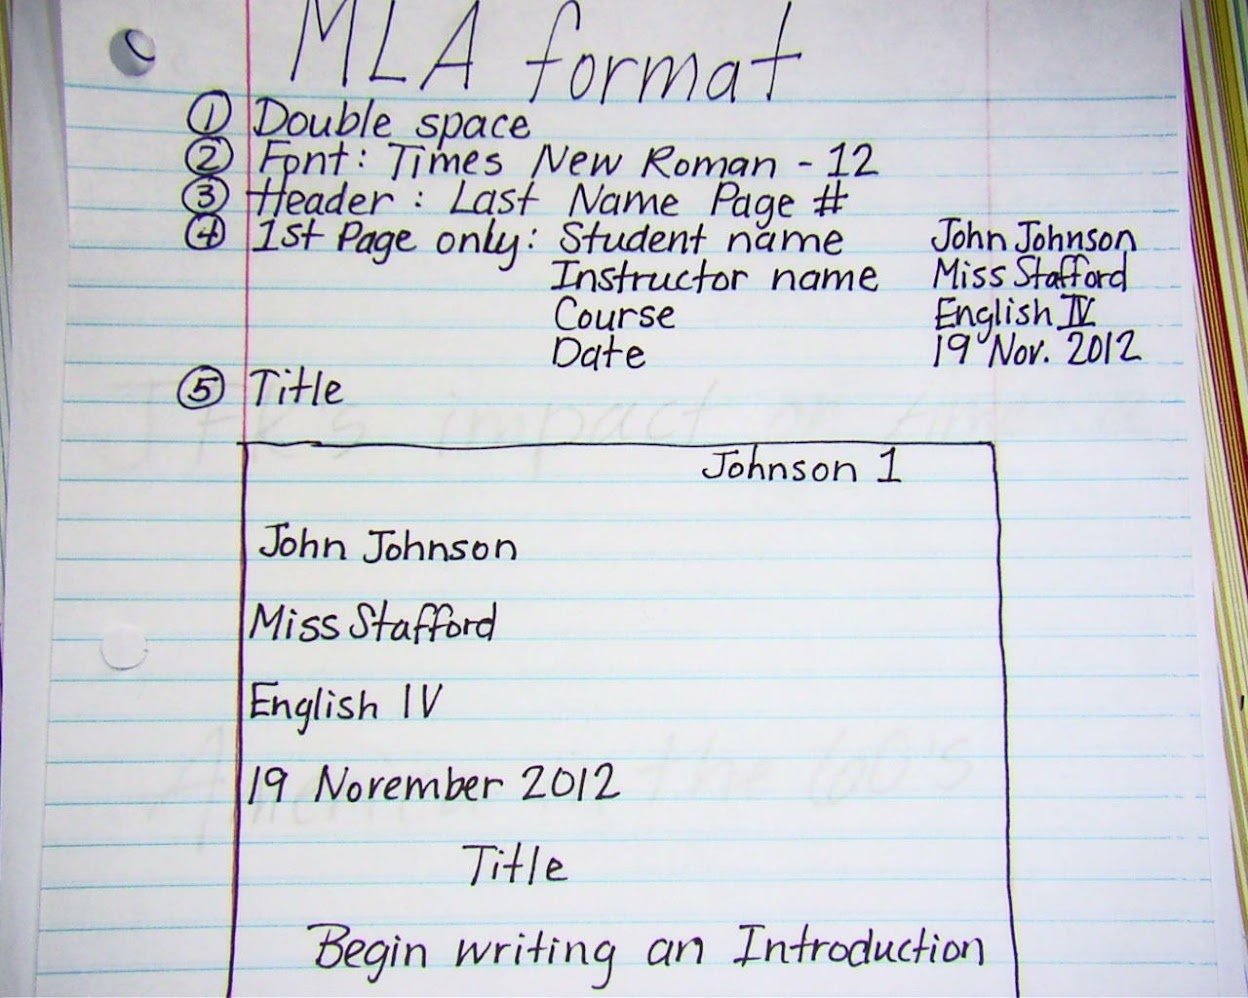 How to cite a thesis paper in mla format